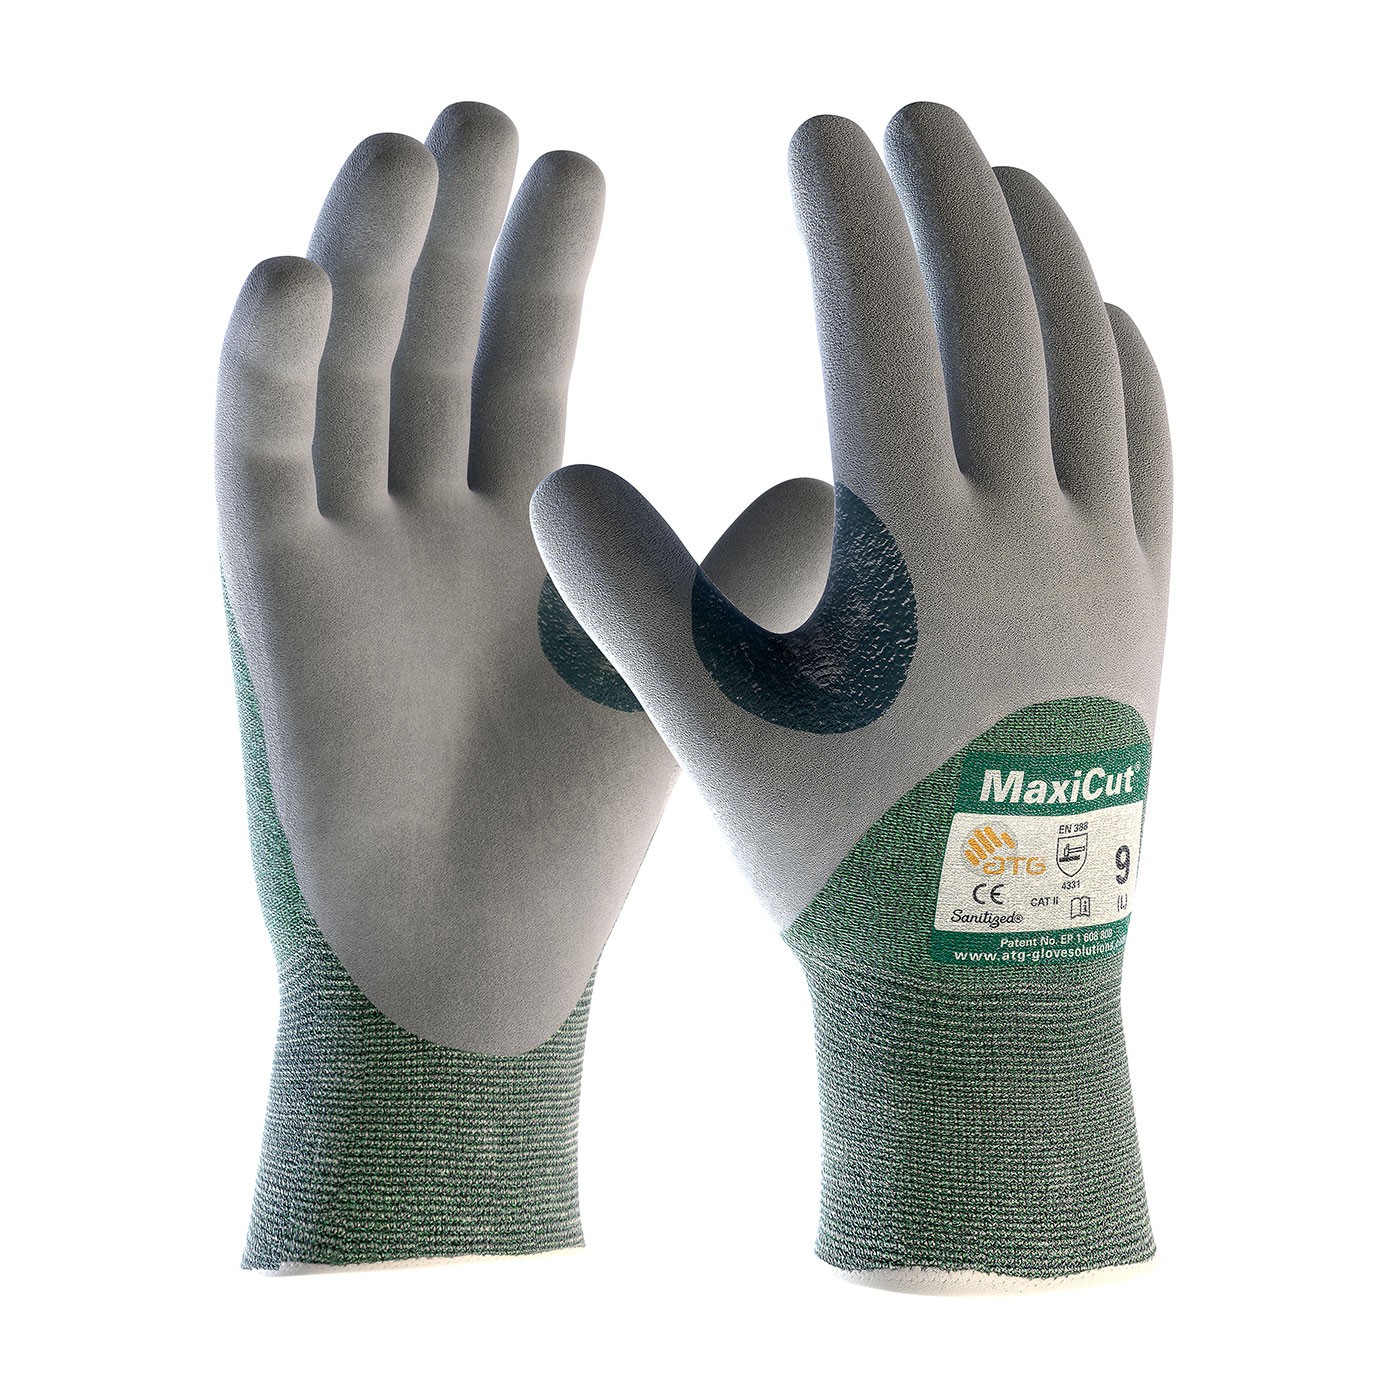 MaxiCut® Seamless Knit Engineered Yarn Glove with Nitrile Coated MicroFoam Grip on Palm, Fingers & Knuckles (#18-575)